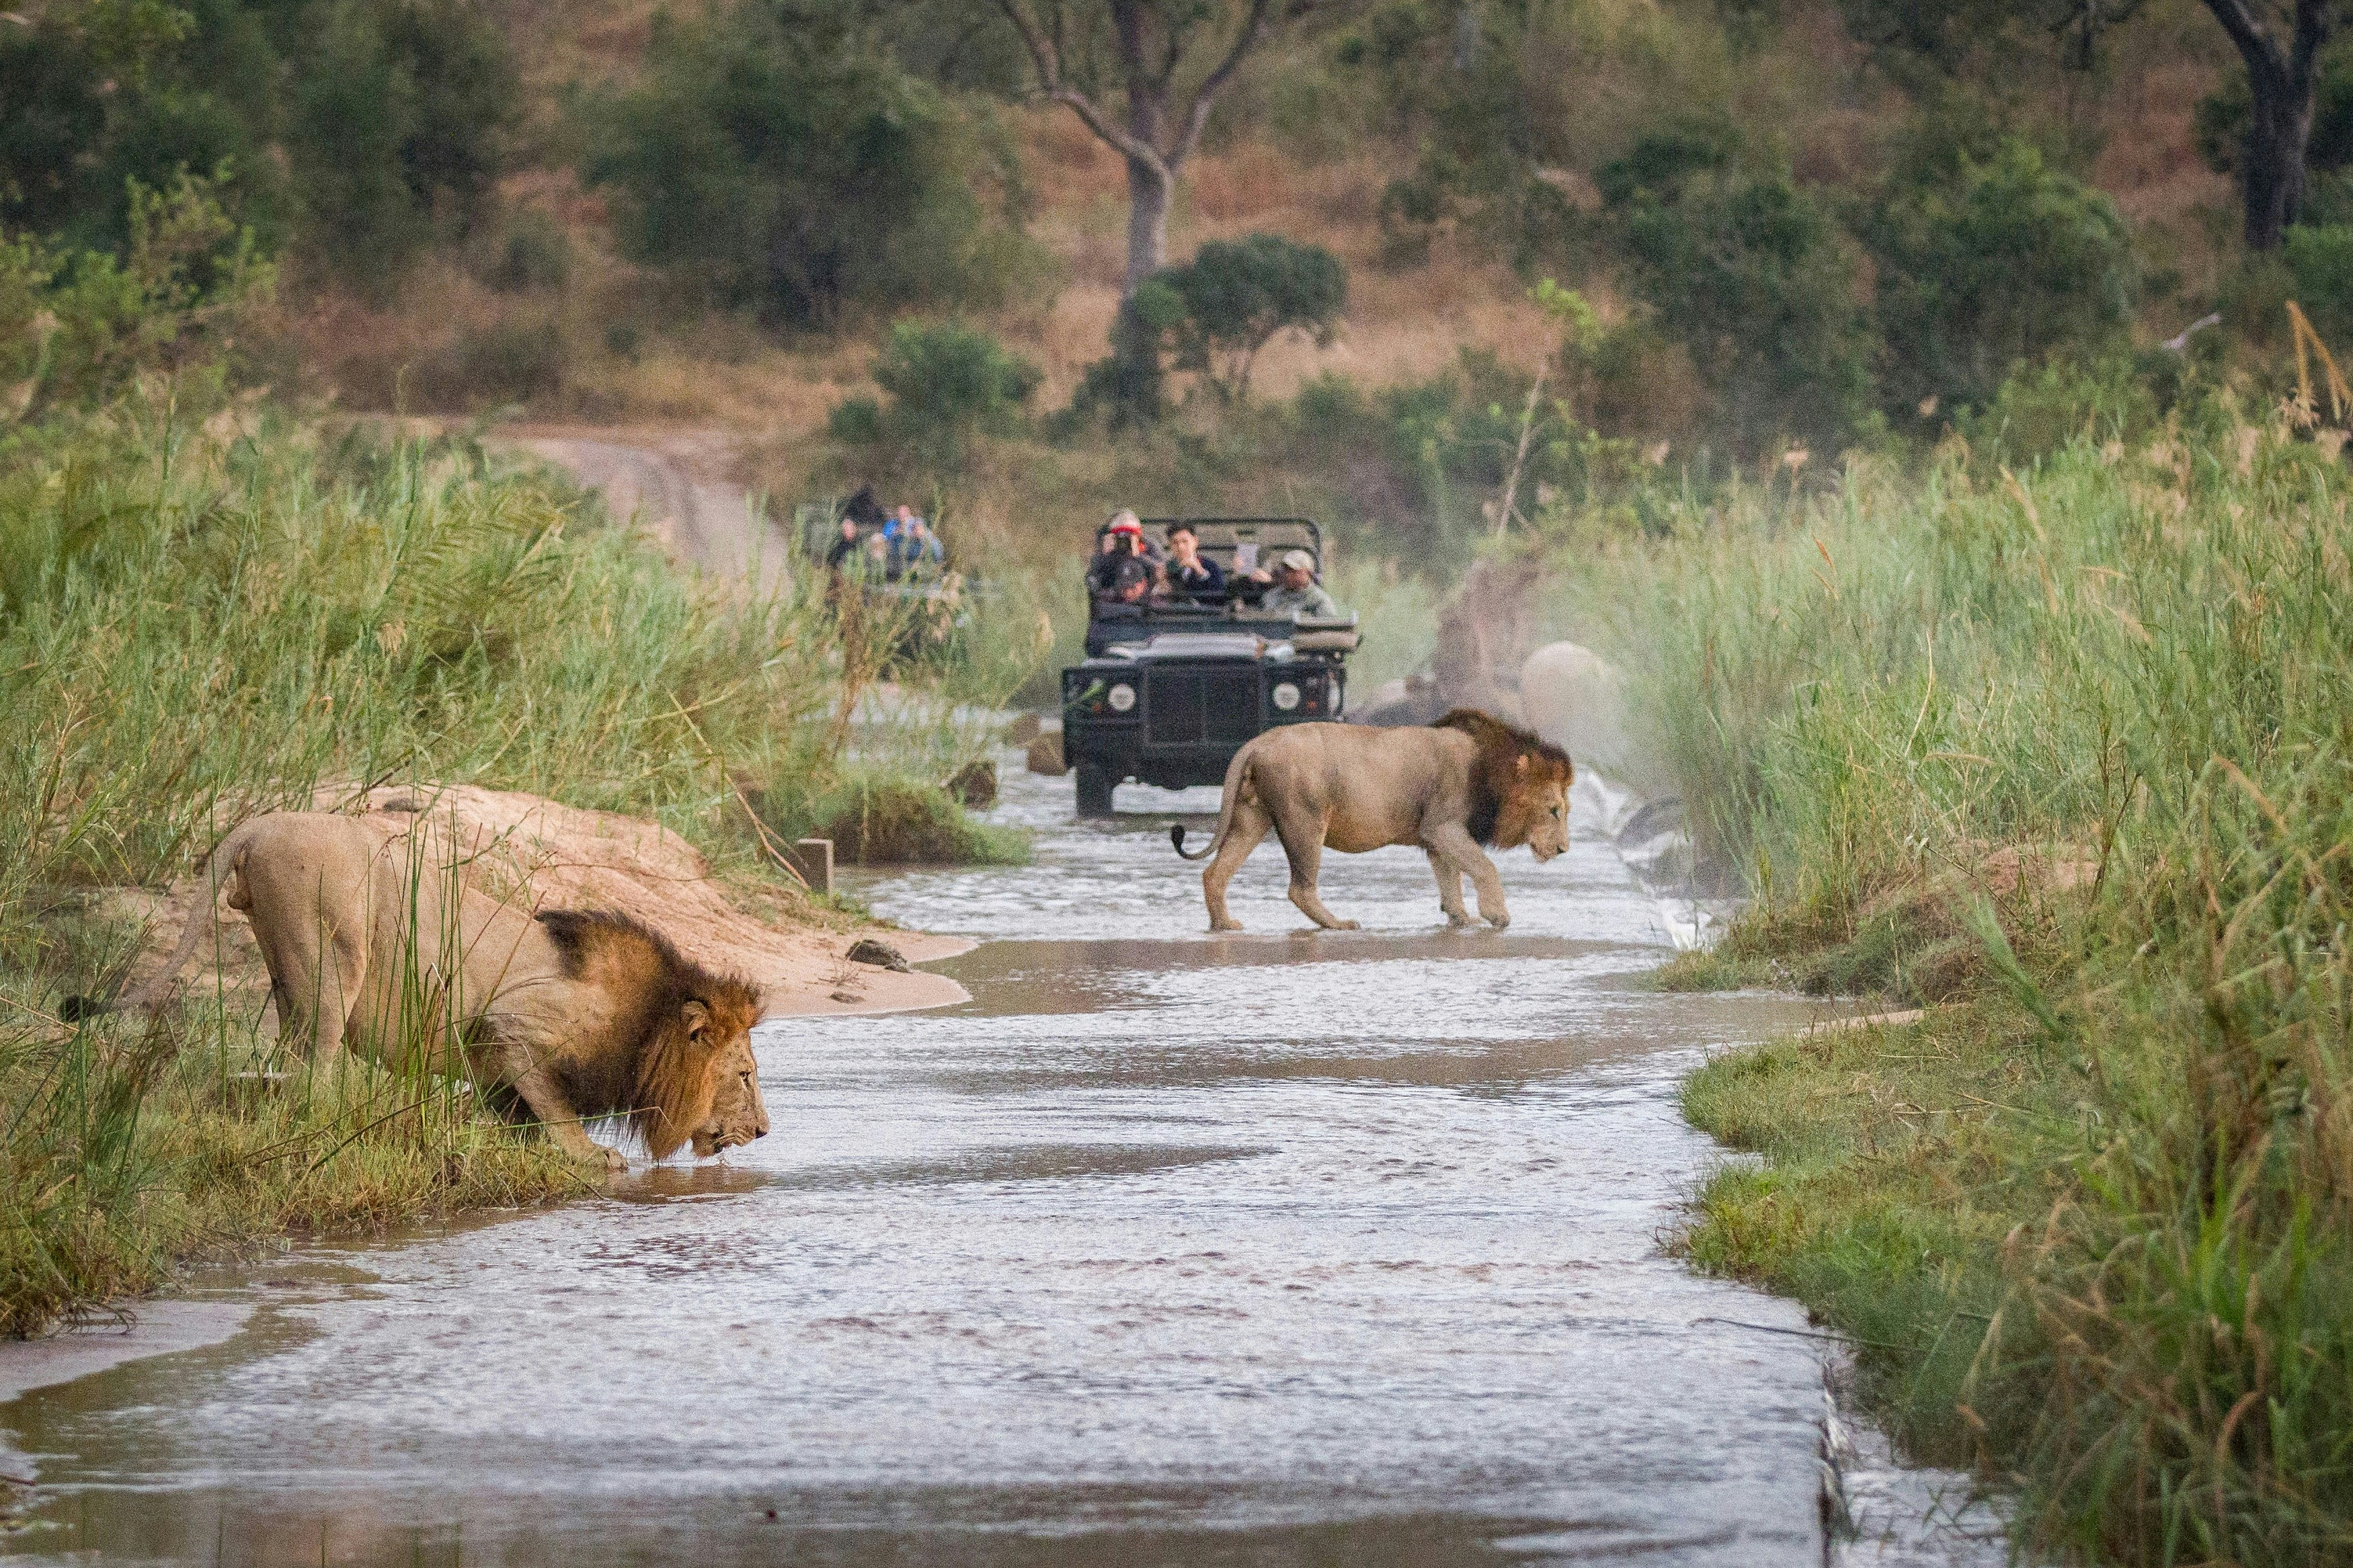 This image is looking straight up a flooded road that is flanked by long grass; in the road are two huge male lions drinking. In the background is an open-topped safari vehicle with guests taking photos.